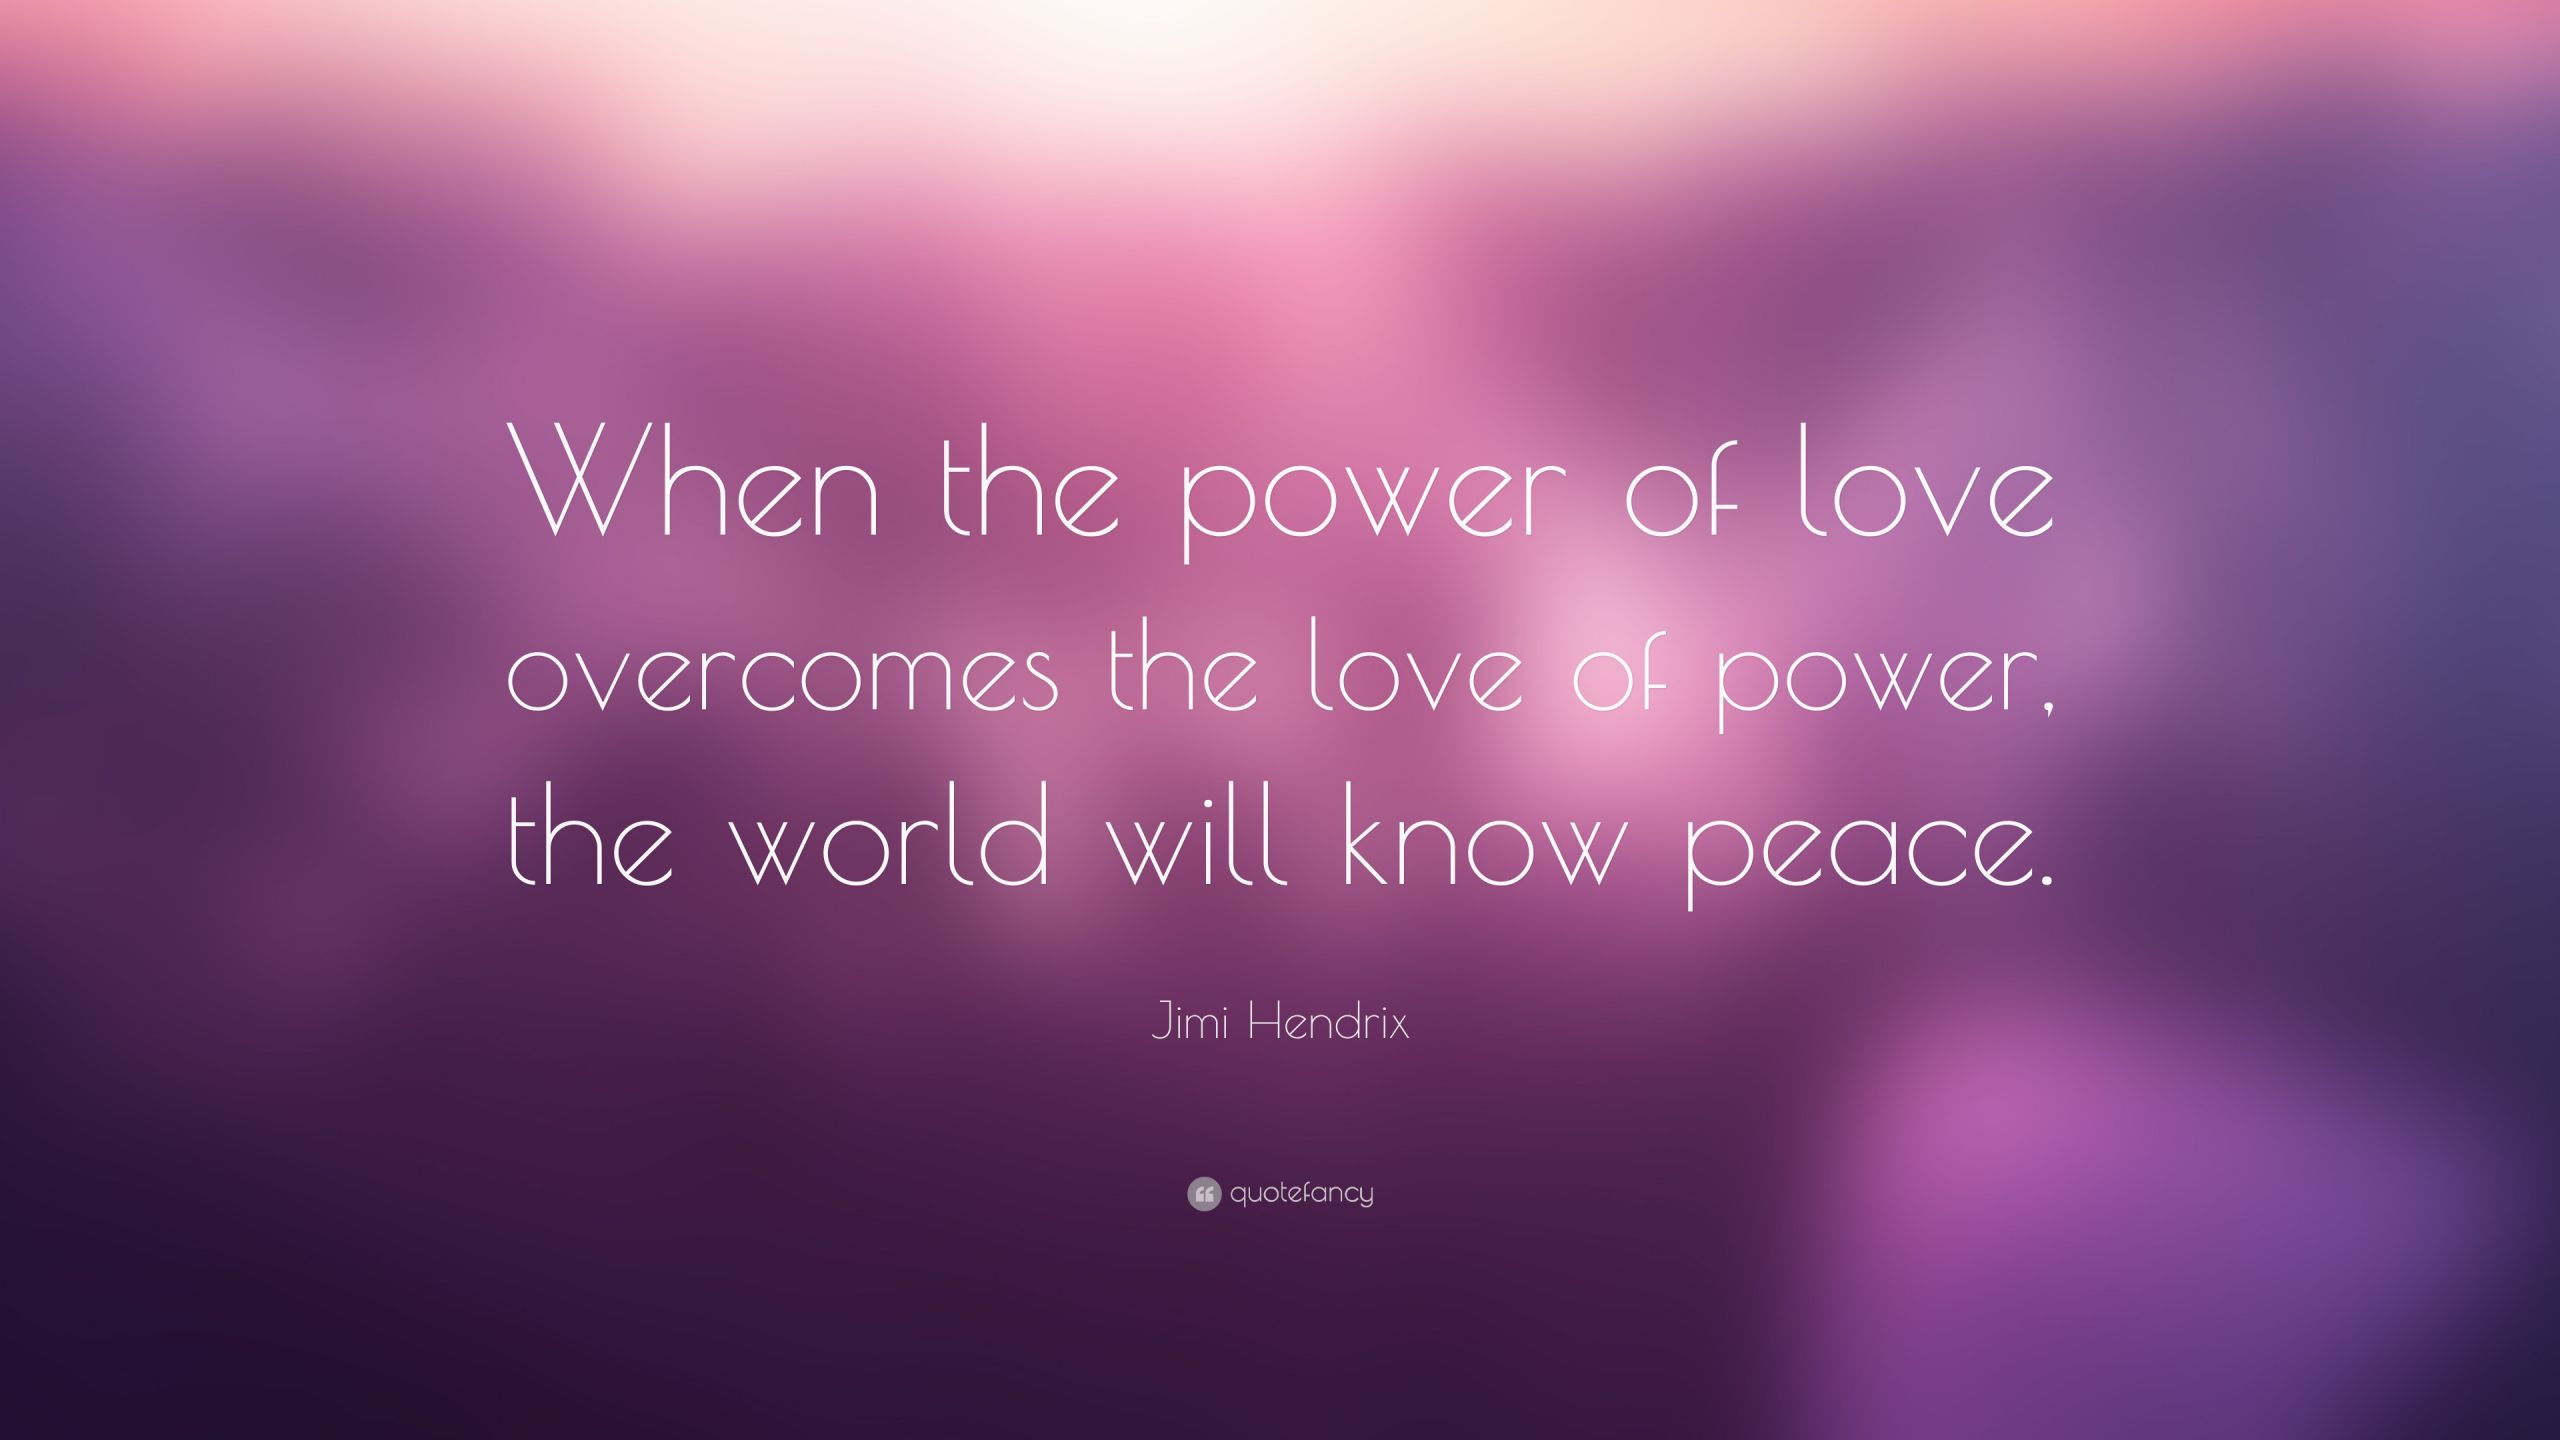 The Power Of Love Quote
 Jimi Hendrix Quote “When the power of love over es the